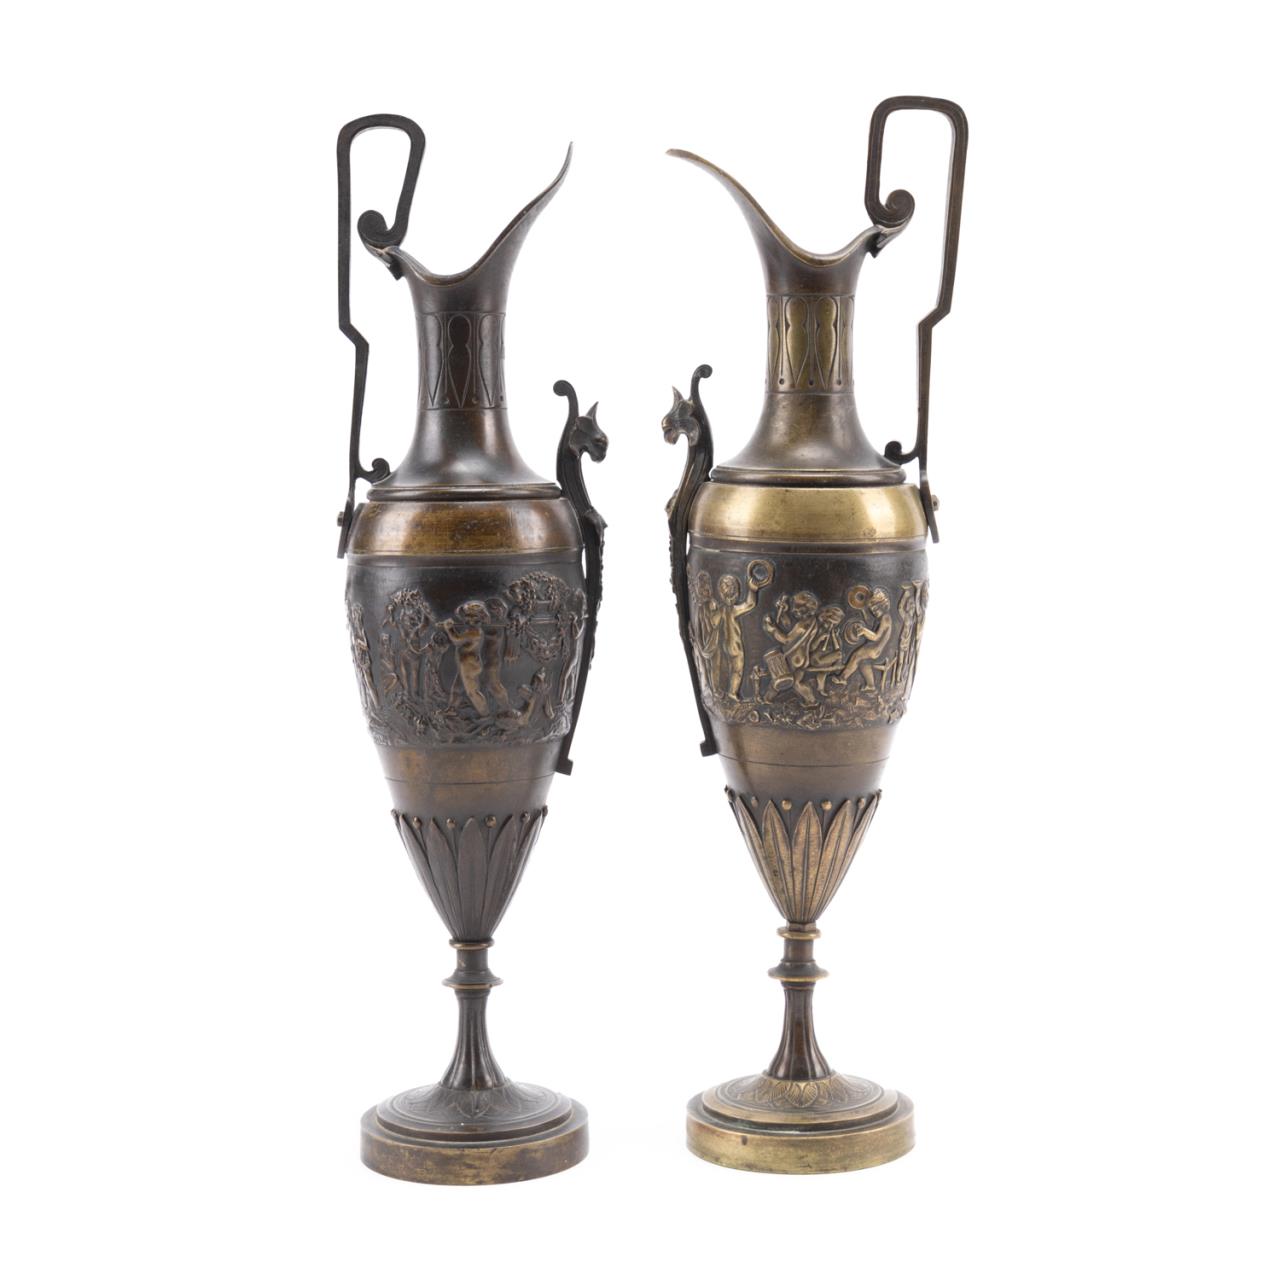 PAIR 19TH C. CONTINENTAL NEOCLASSICAL